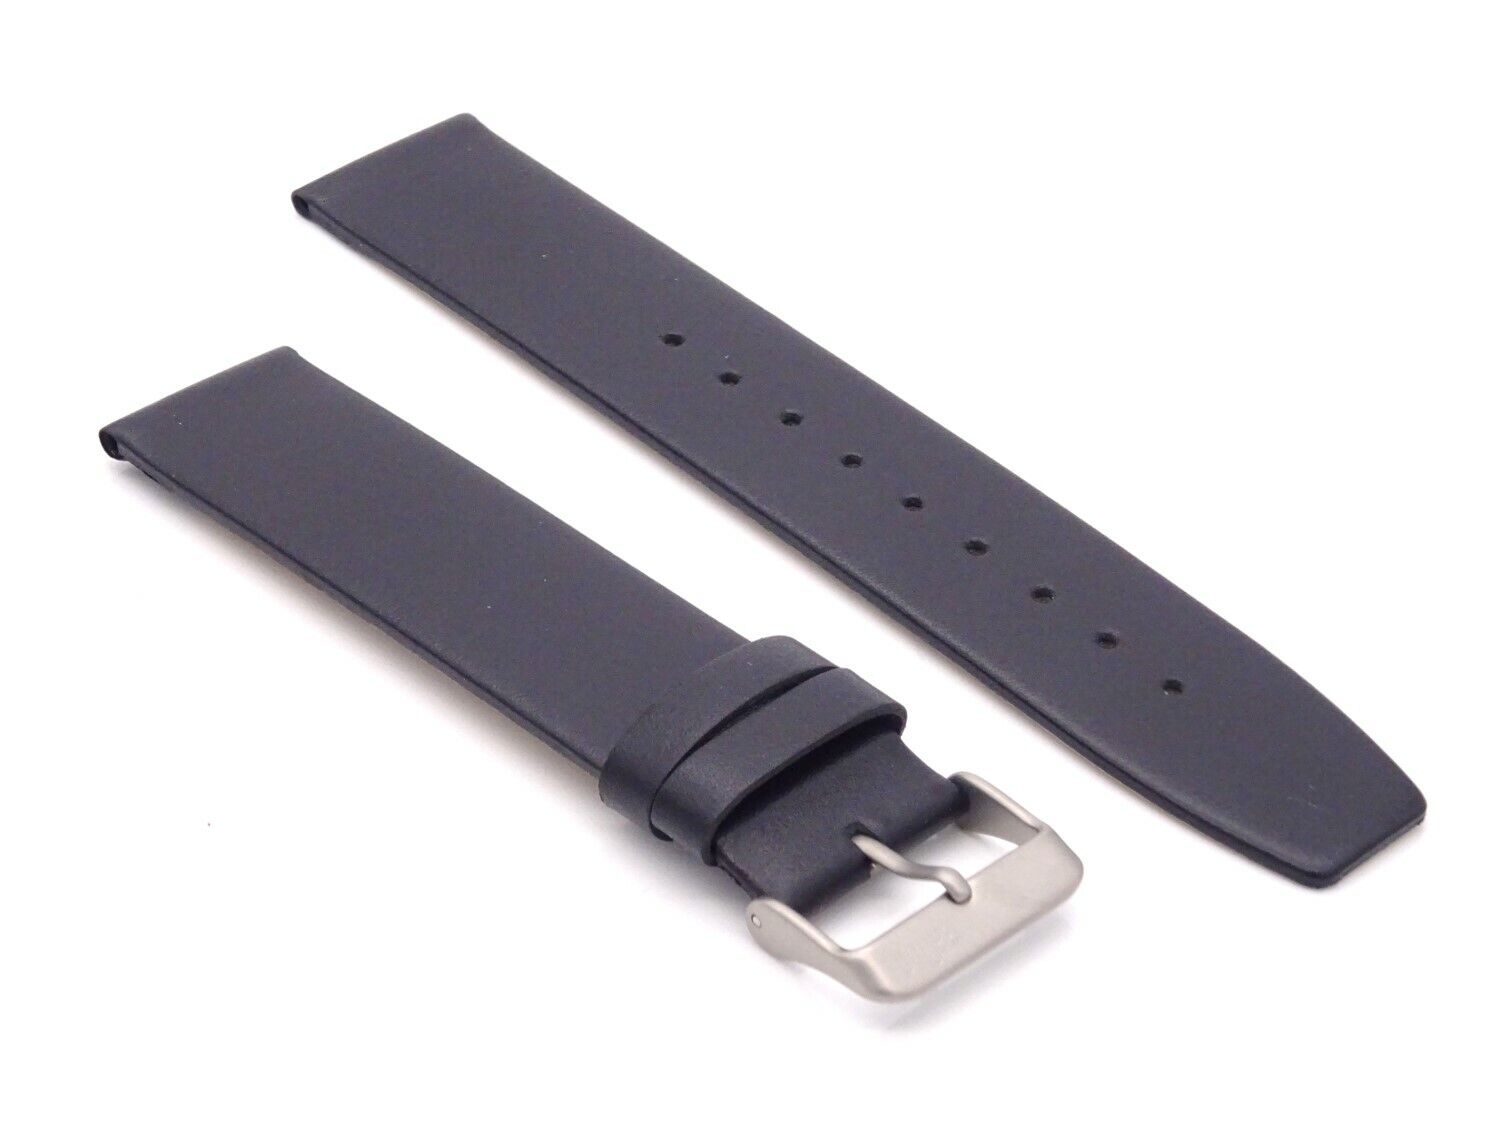 Original Replacement Strap for Braun watch BN 0231 bkbkgal, Leather, Black, 69048